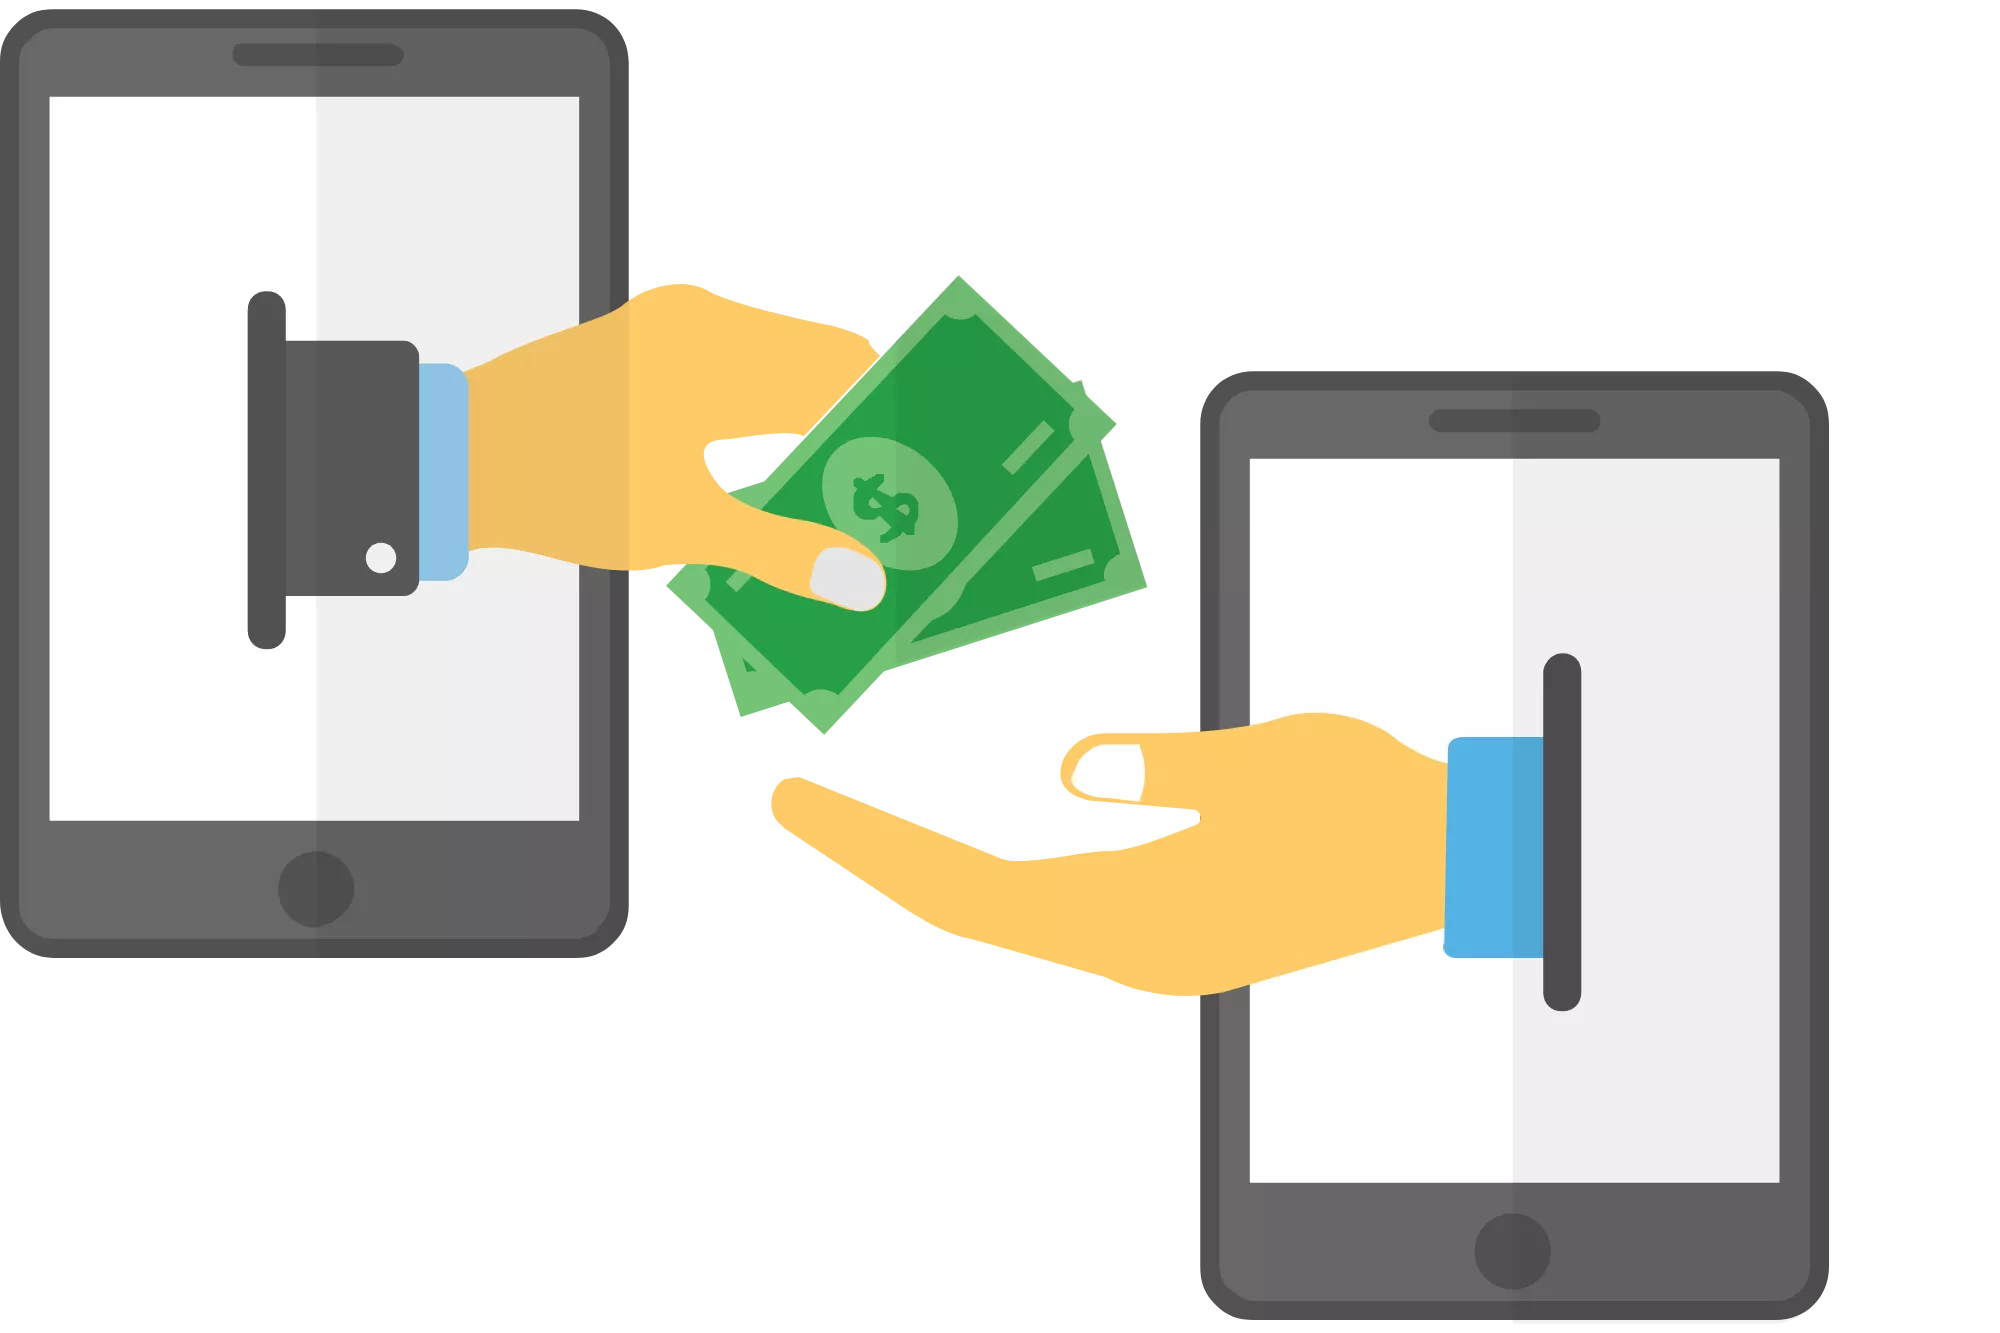 two hands coming out of smart device tablets and exchanging money to represent paying via PayPal for business